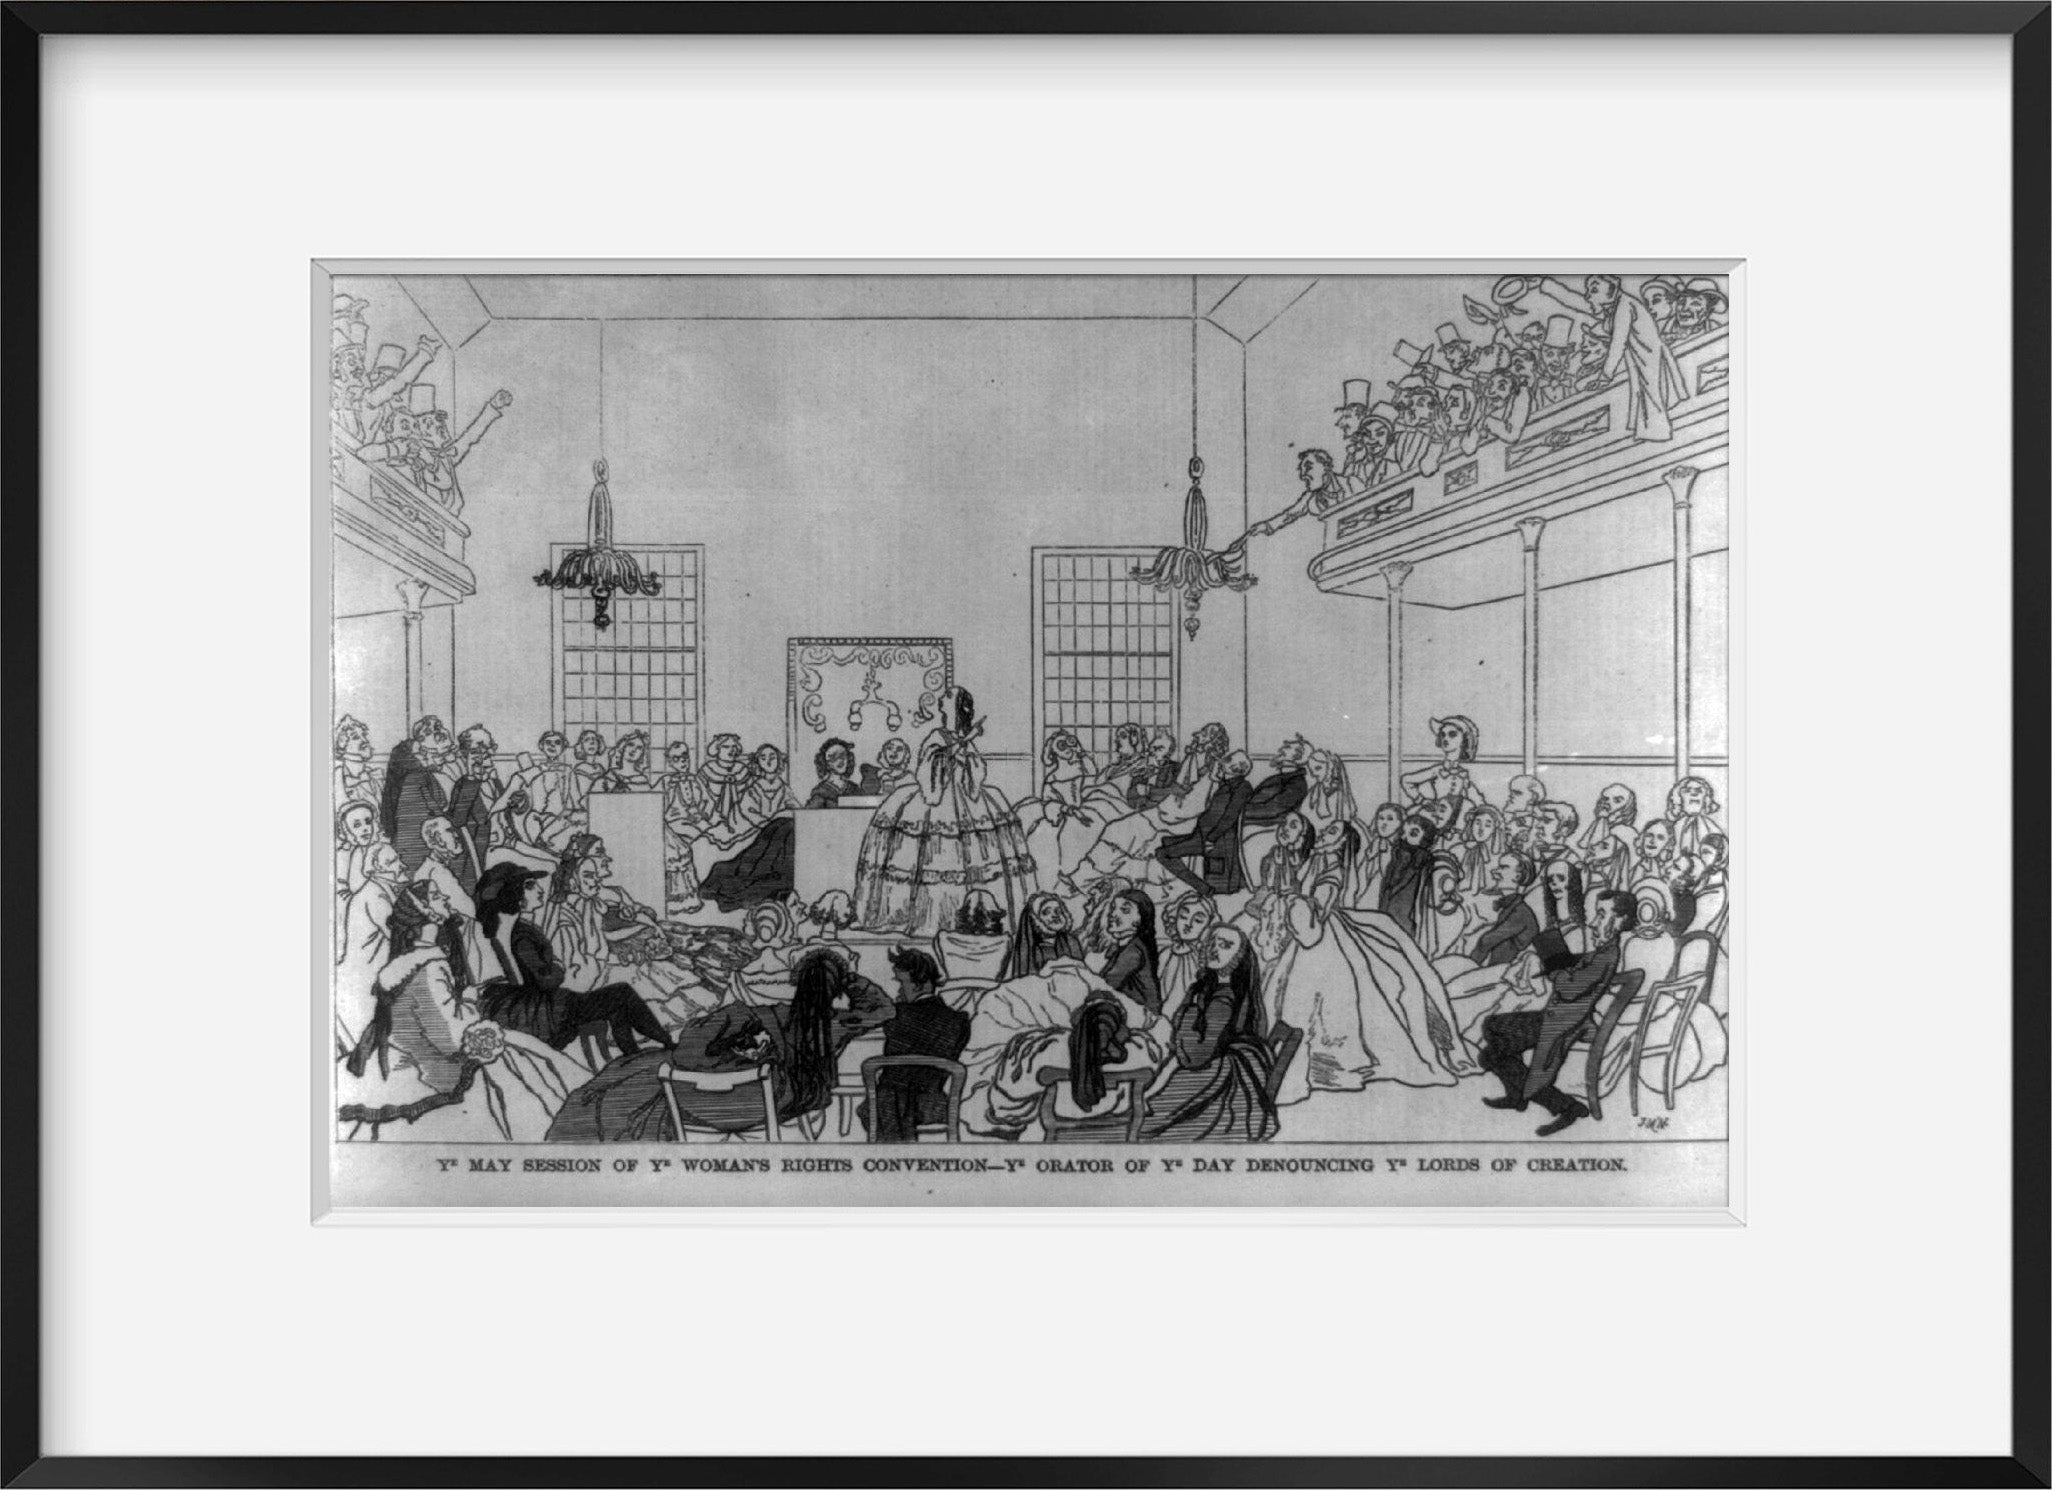 Vintage 1859 June. photograph: Ye May session of ye woman's rights convention -